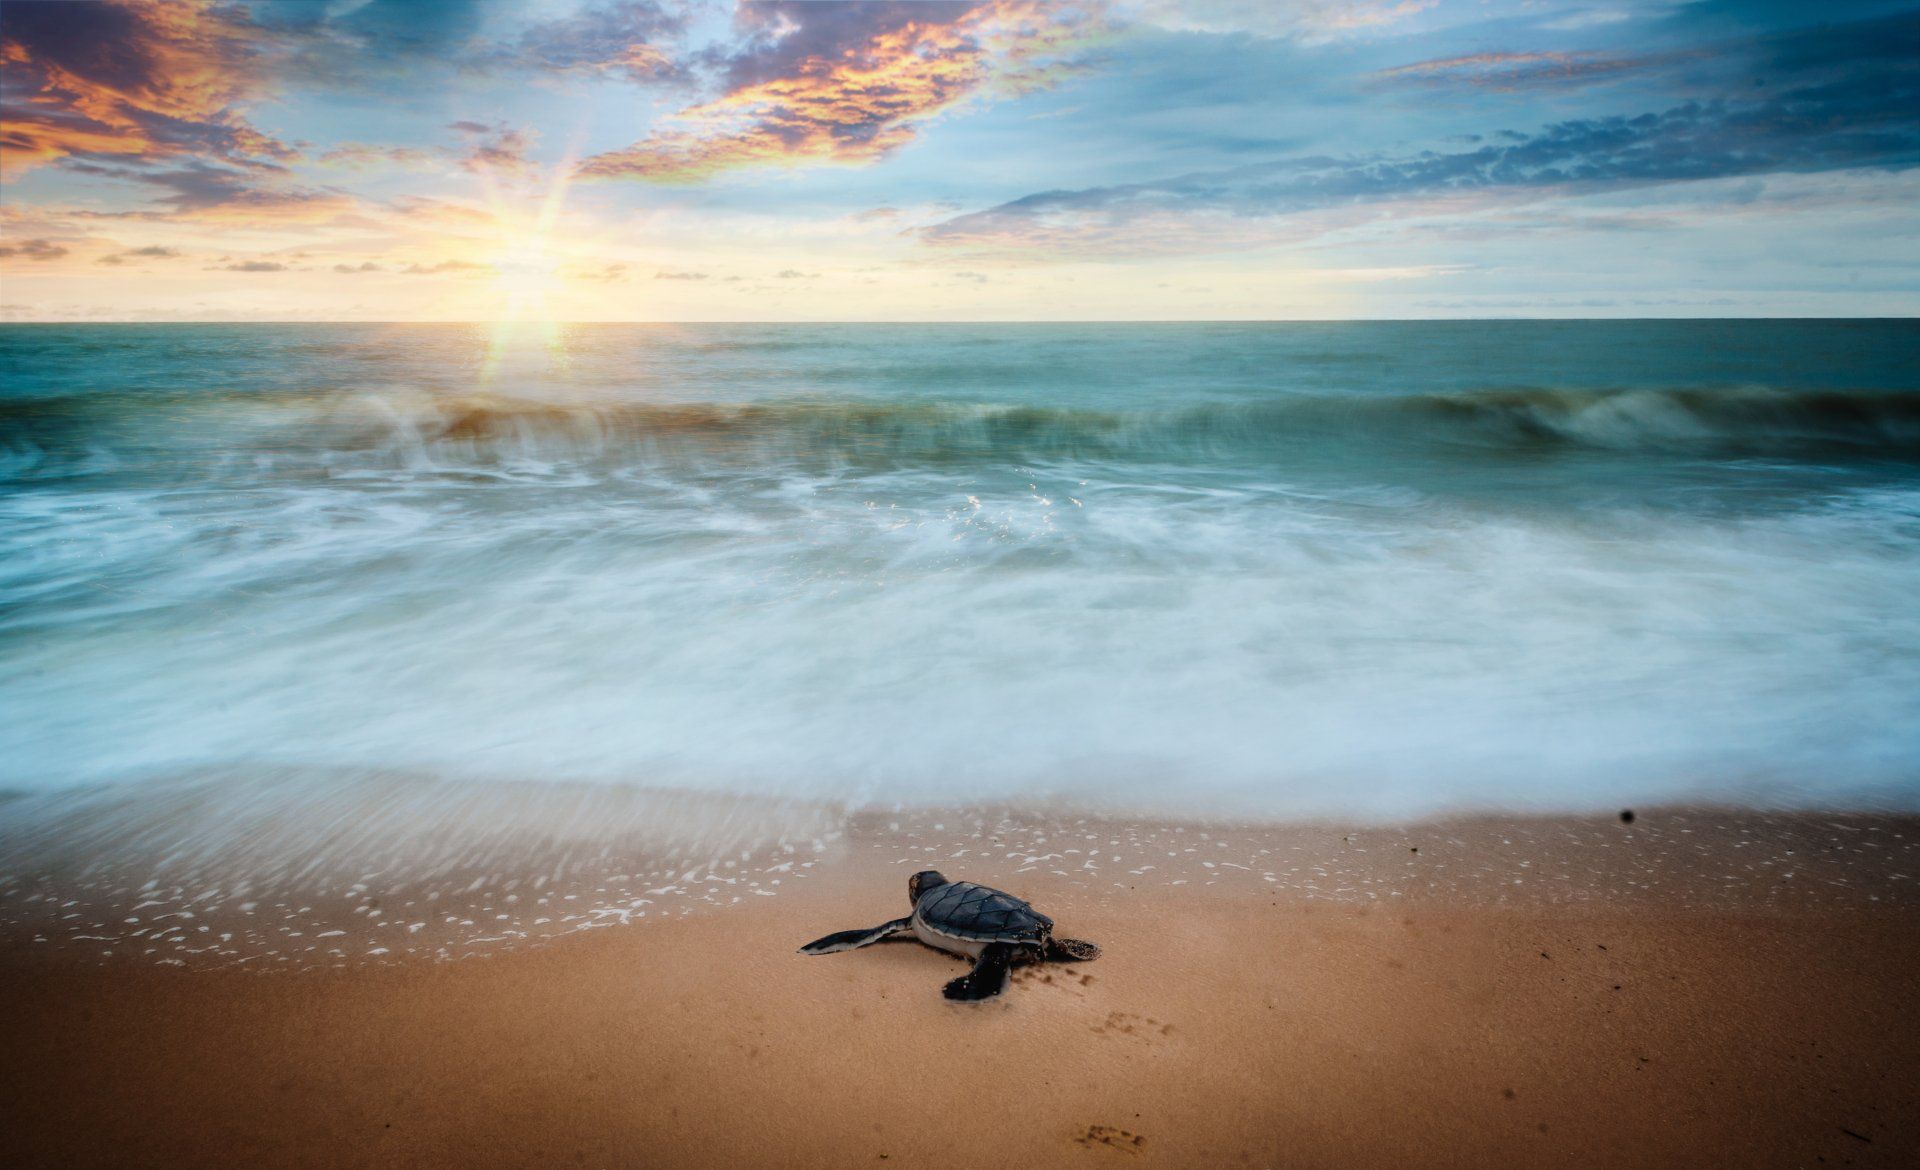 A baby sea turtle is crawling on the beach towards the ocean.